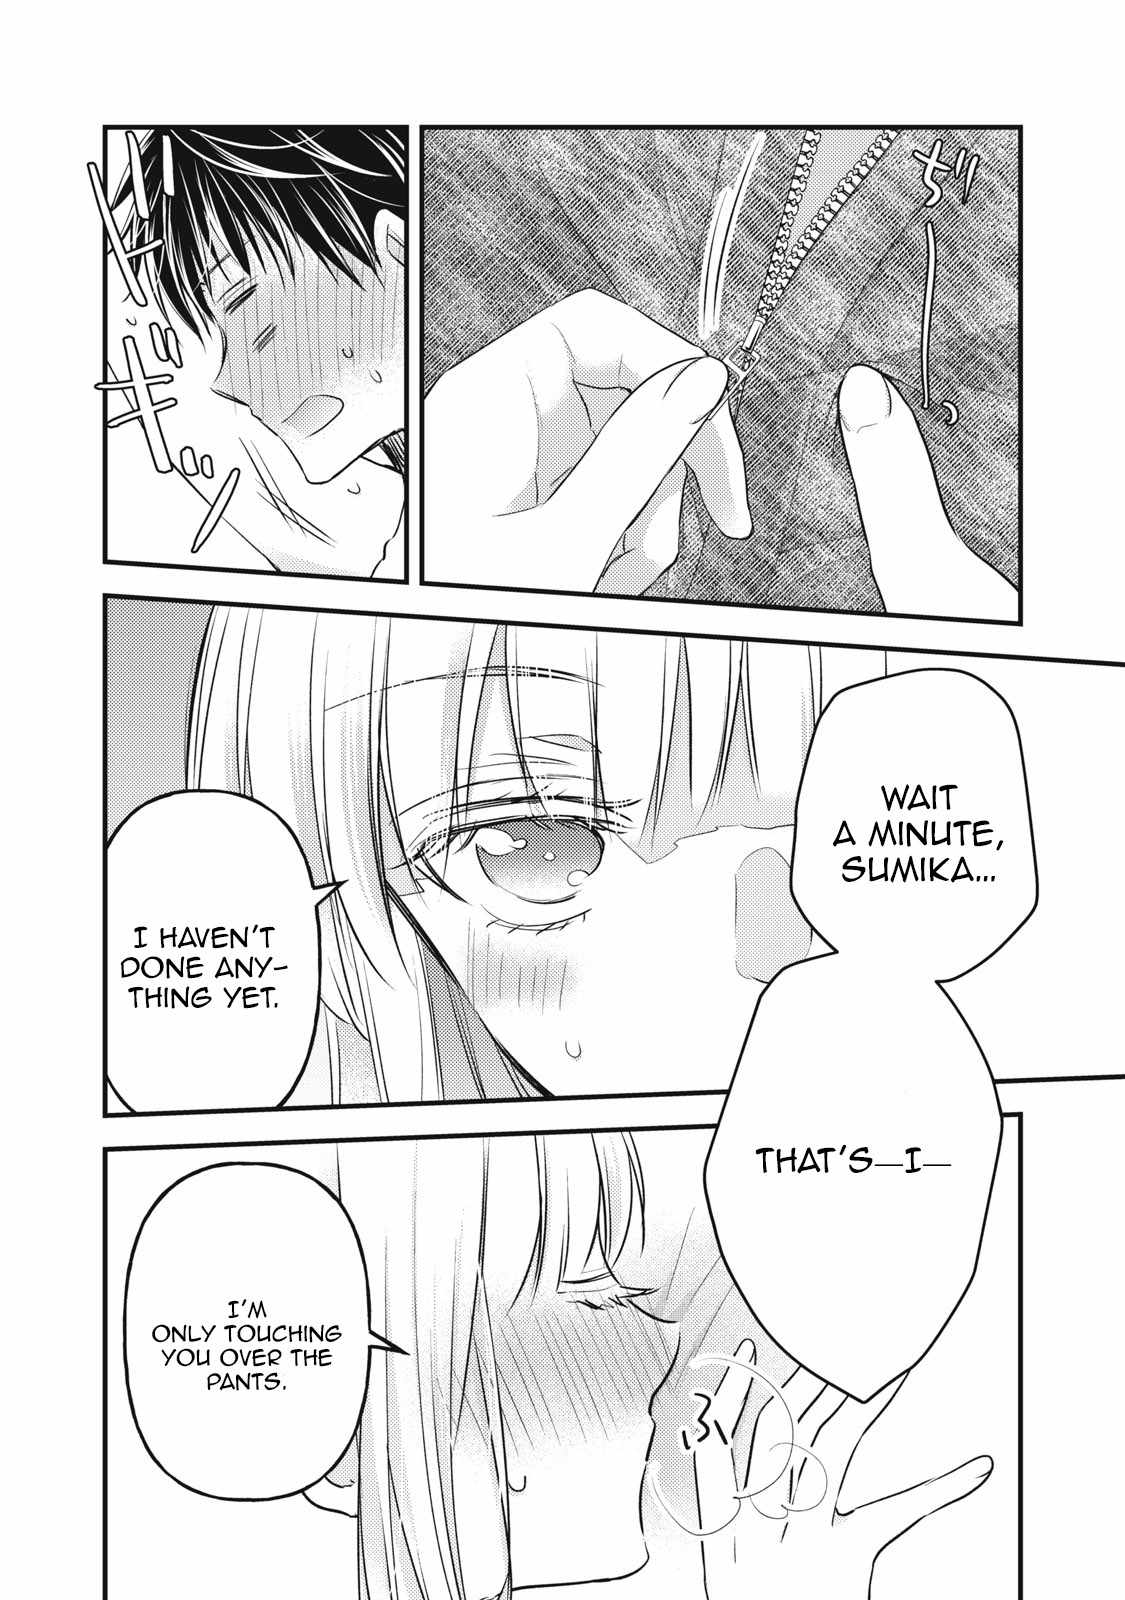 We May Be an Inexperienced Couple but... chapter 100 page 4